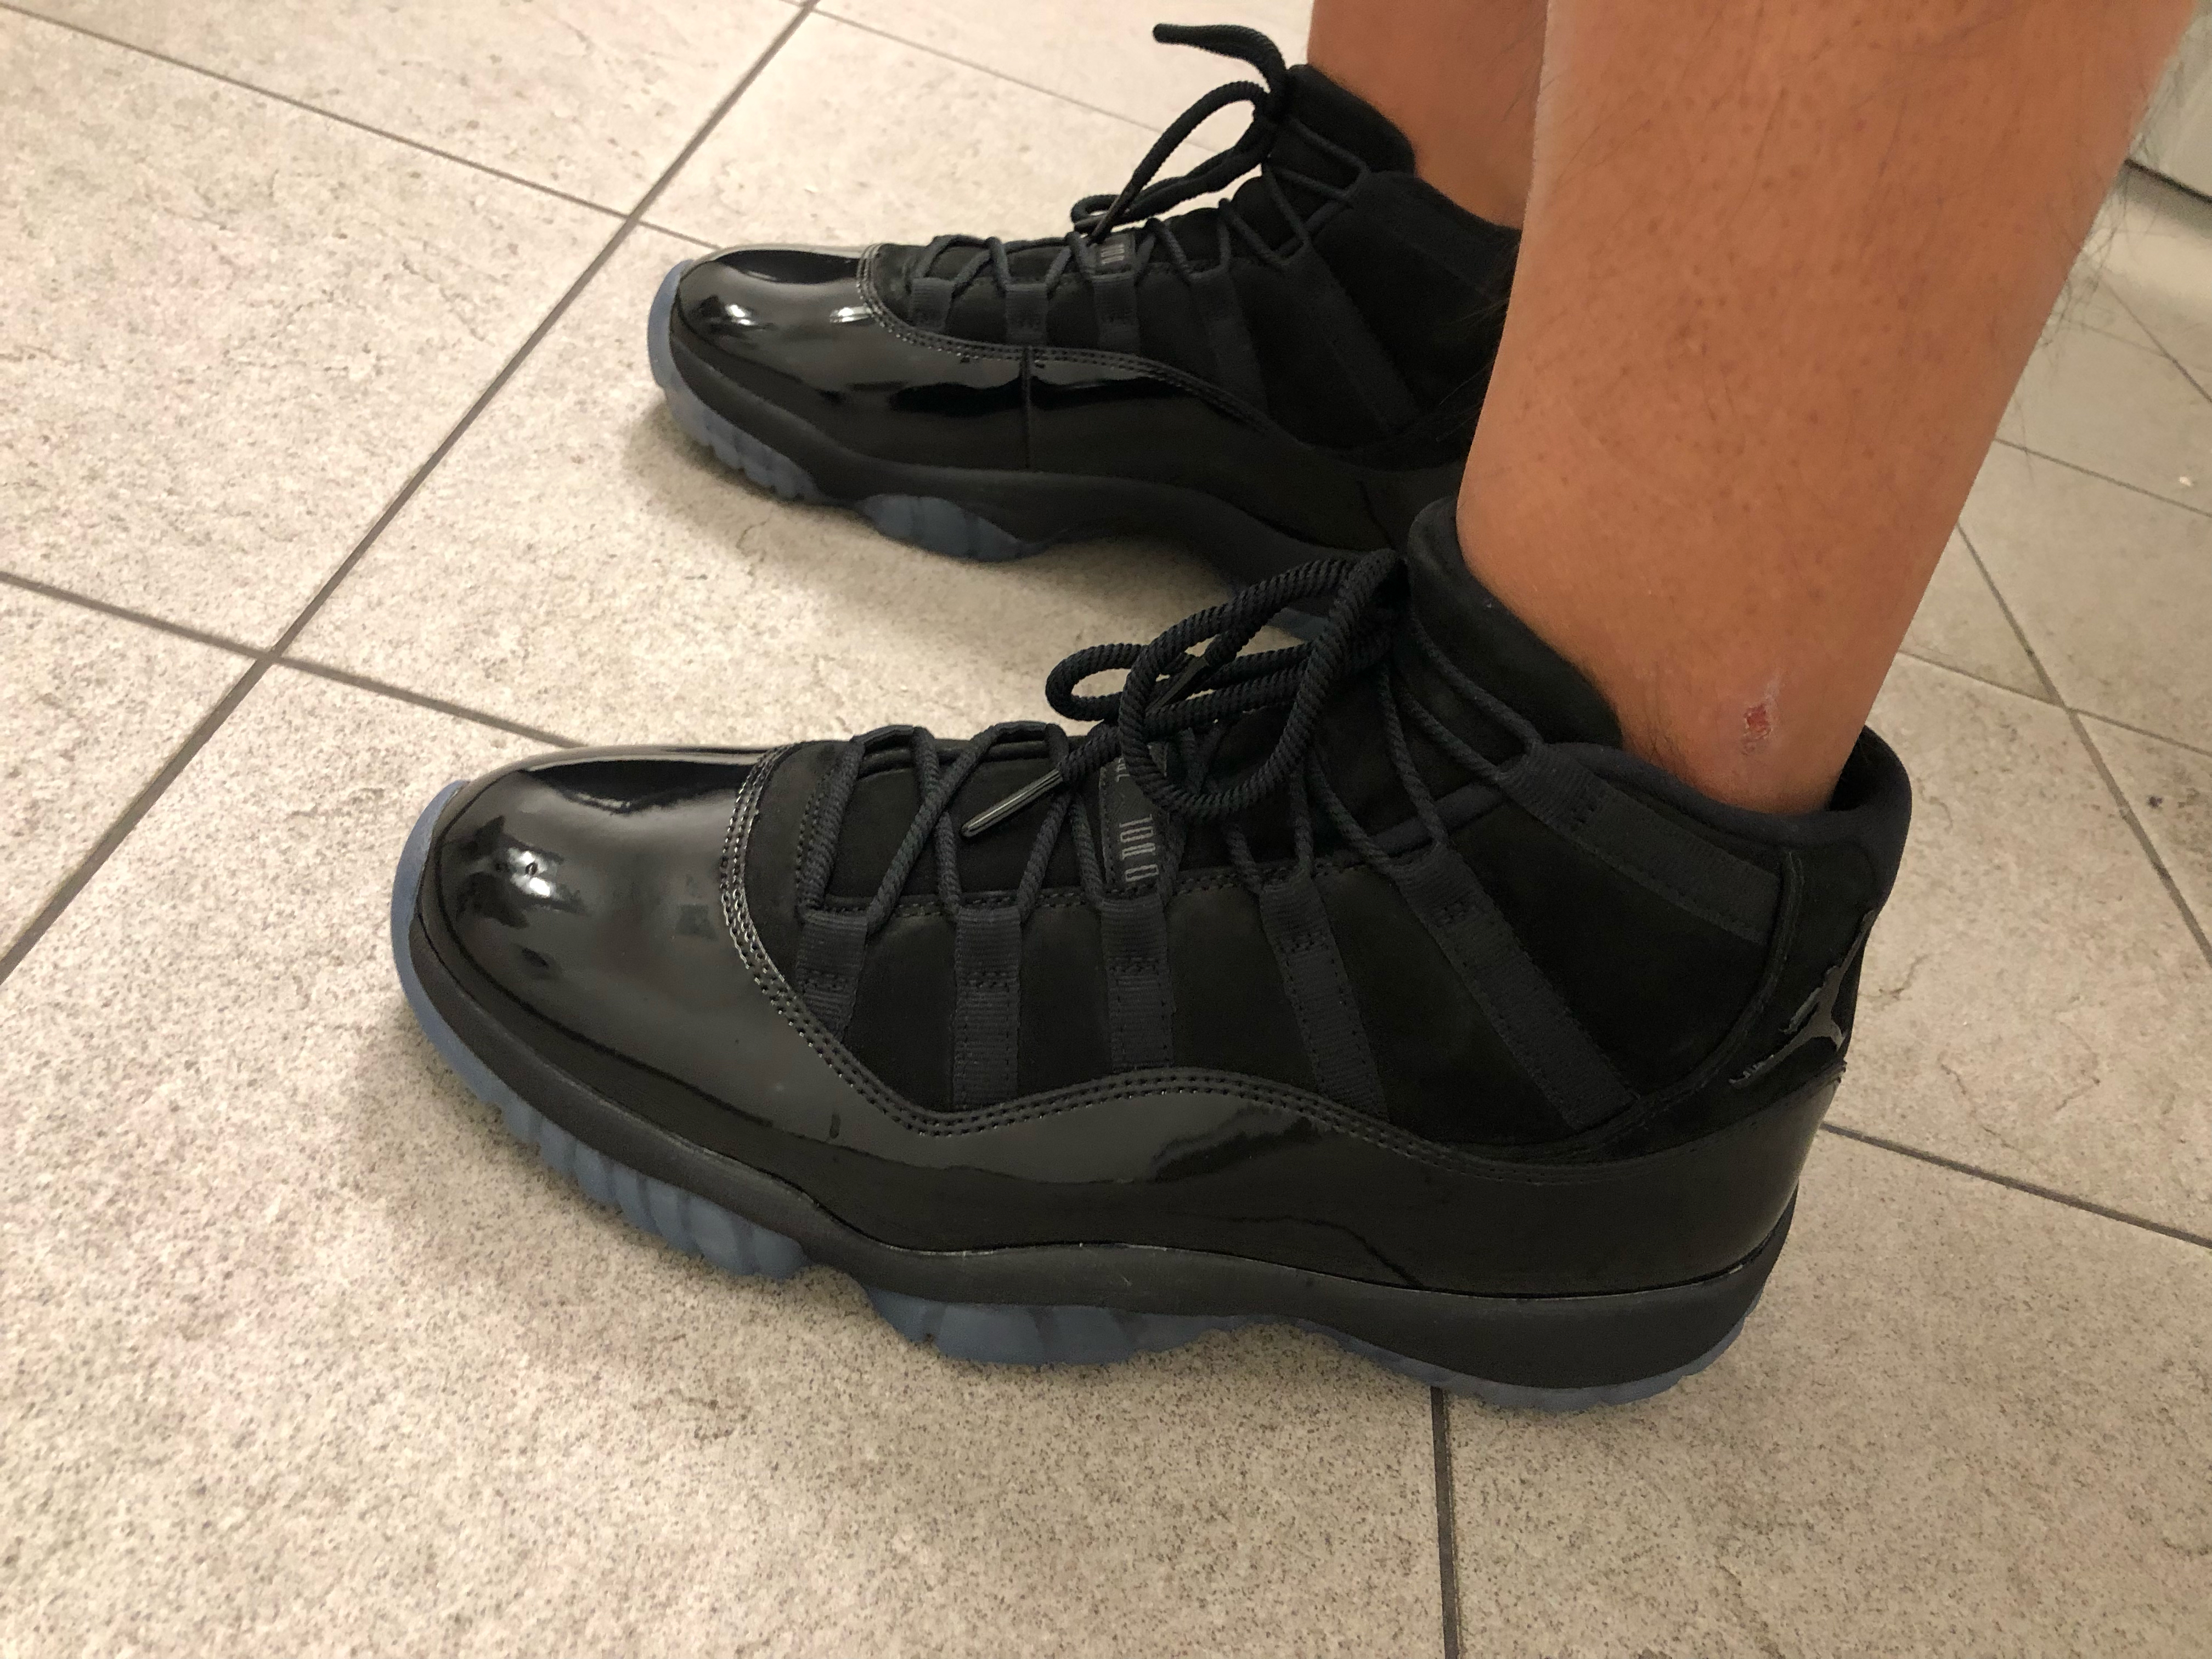 cap and gown 11s size 13